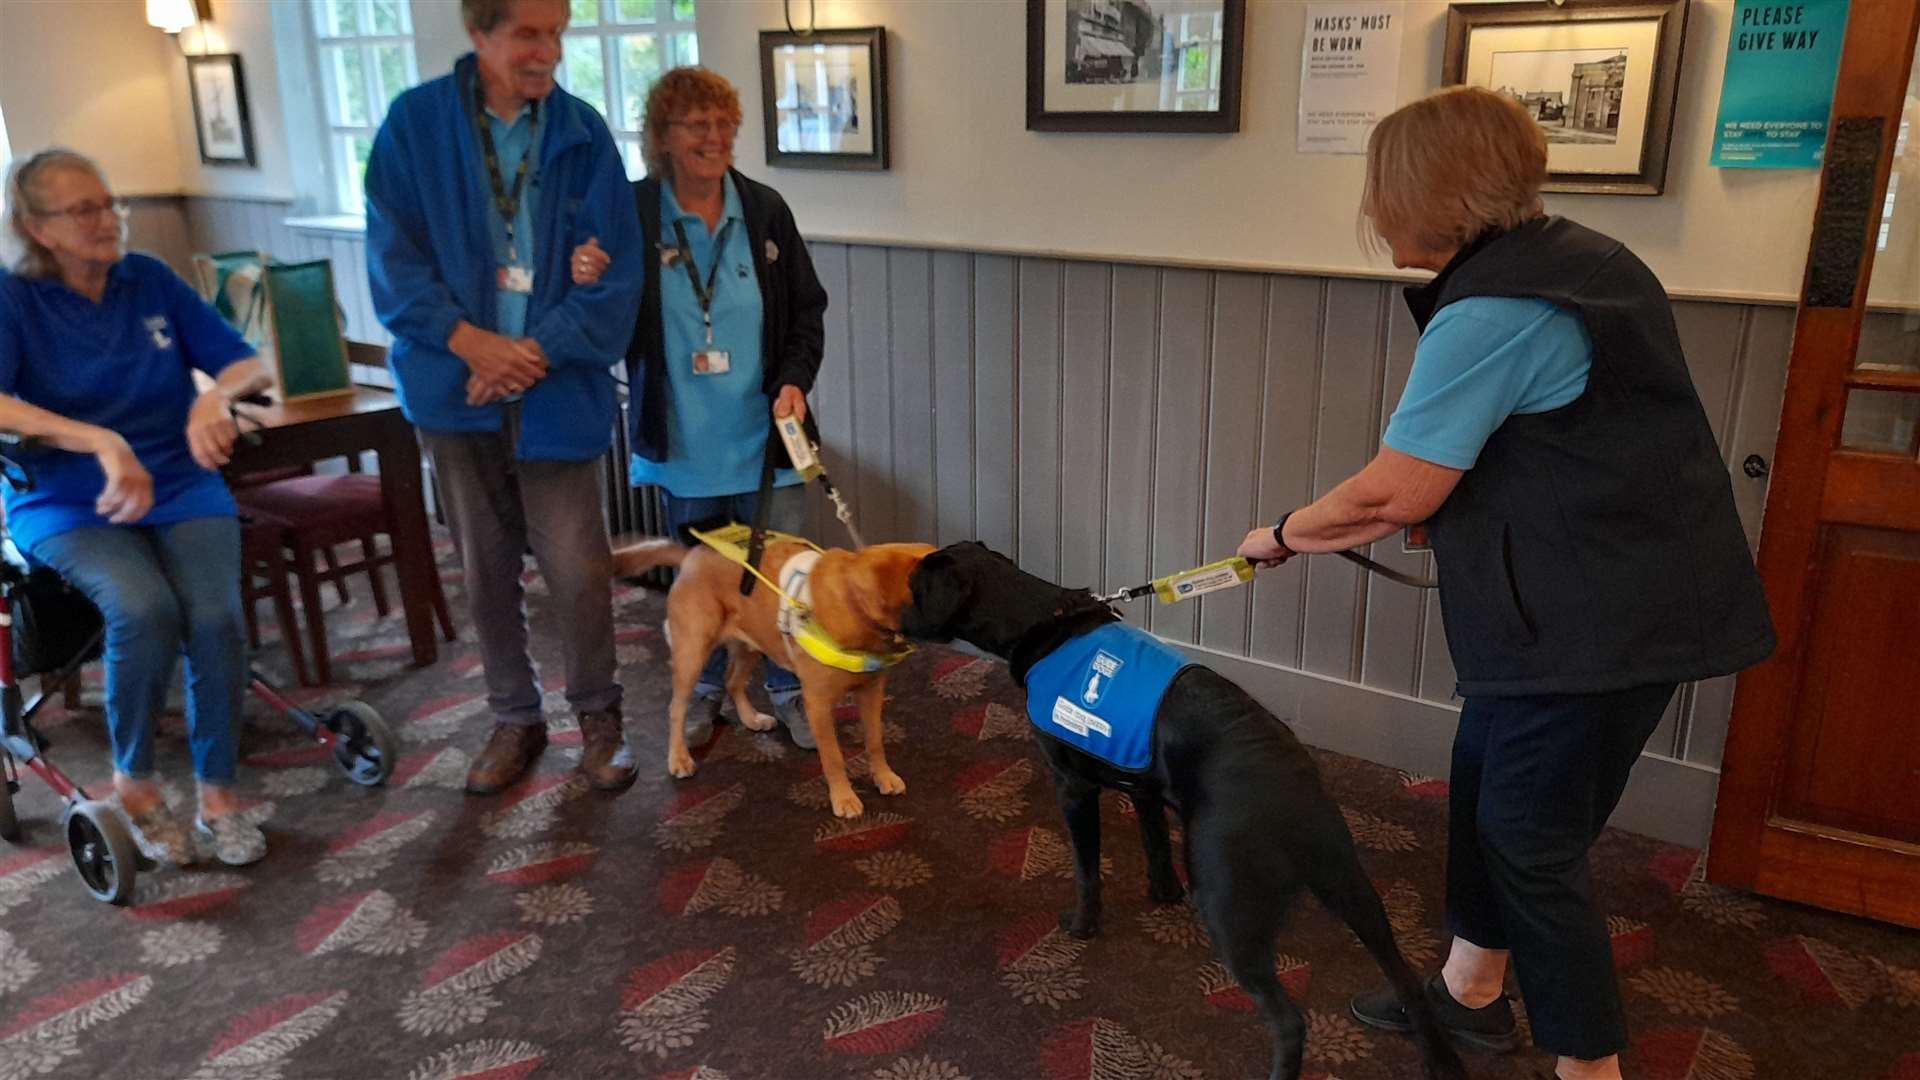 Max is introduced to Rosie, Pat Marshall's fully trained guide dog